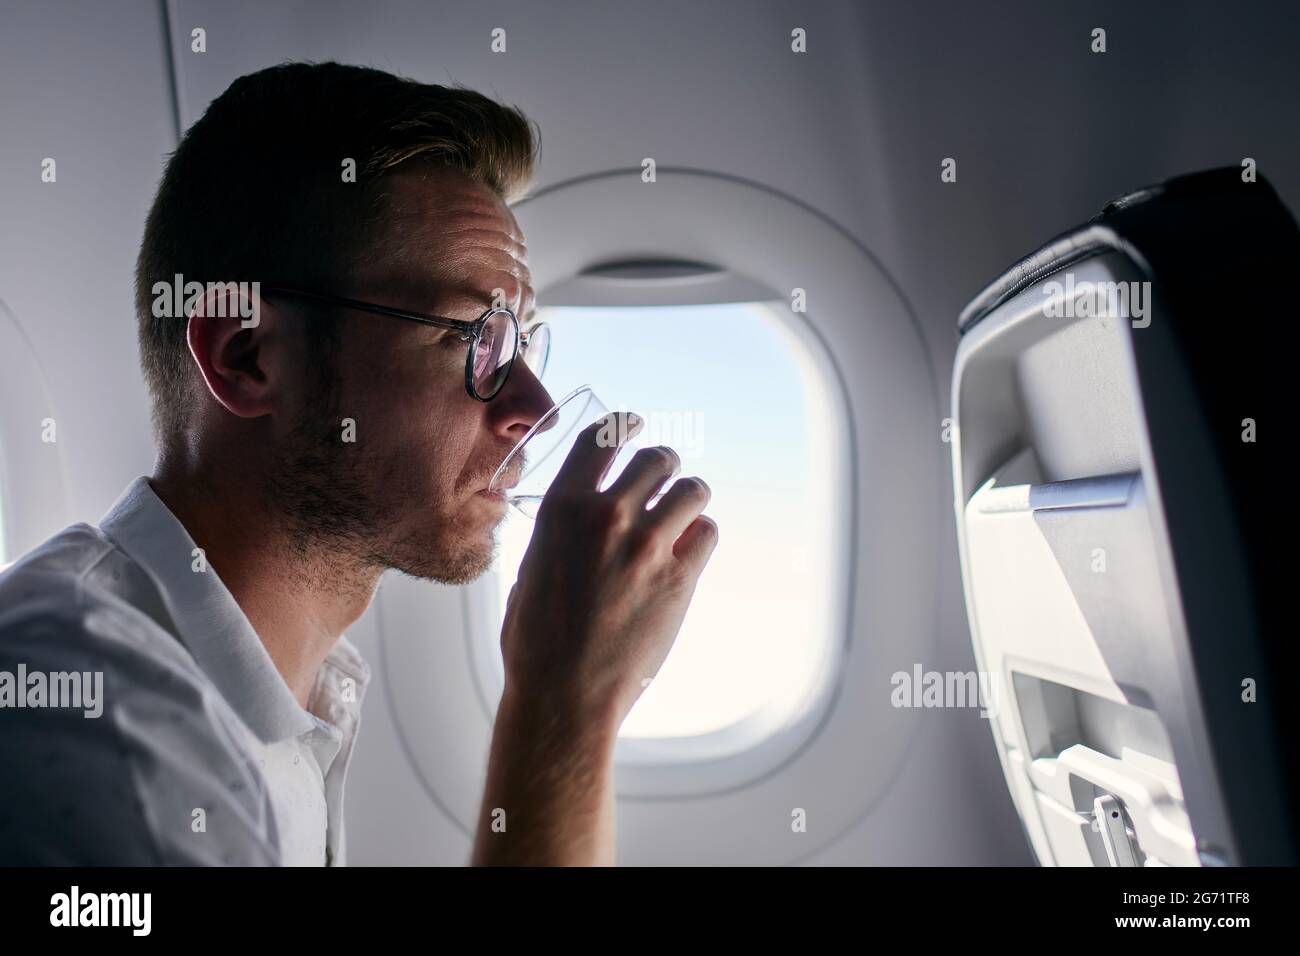 Portrait of passenger during flight. Young man drinking water from plastic cup. Stock Photo